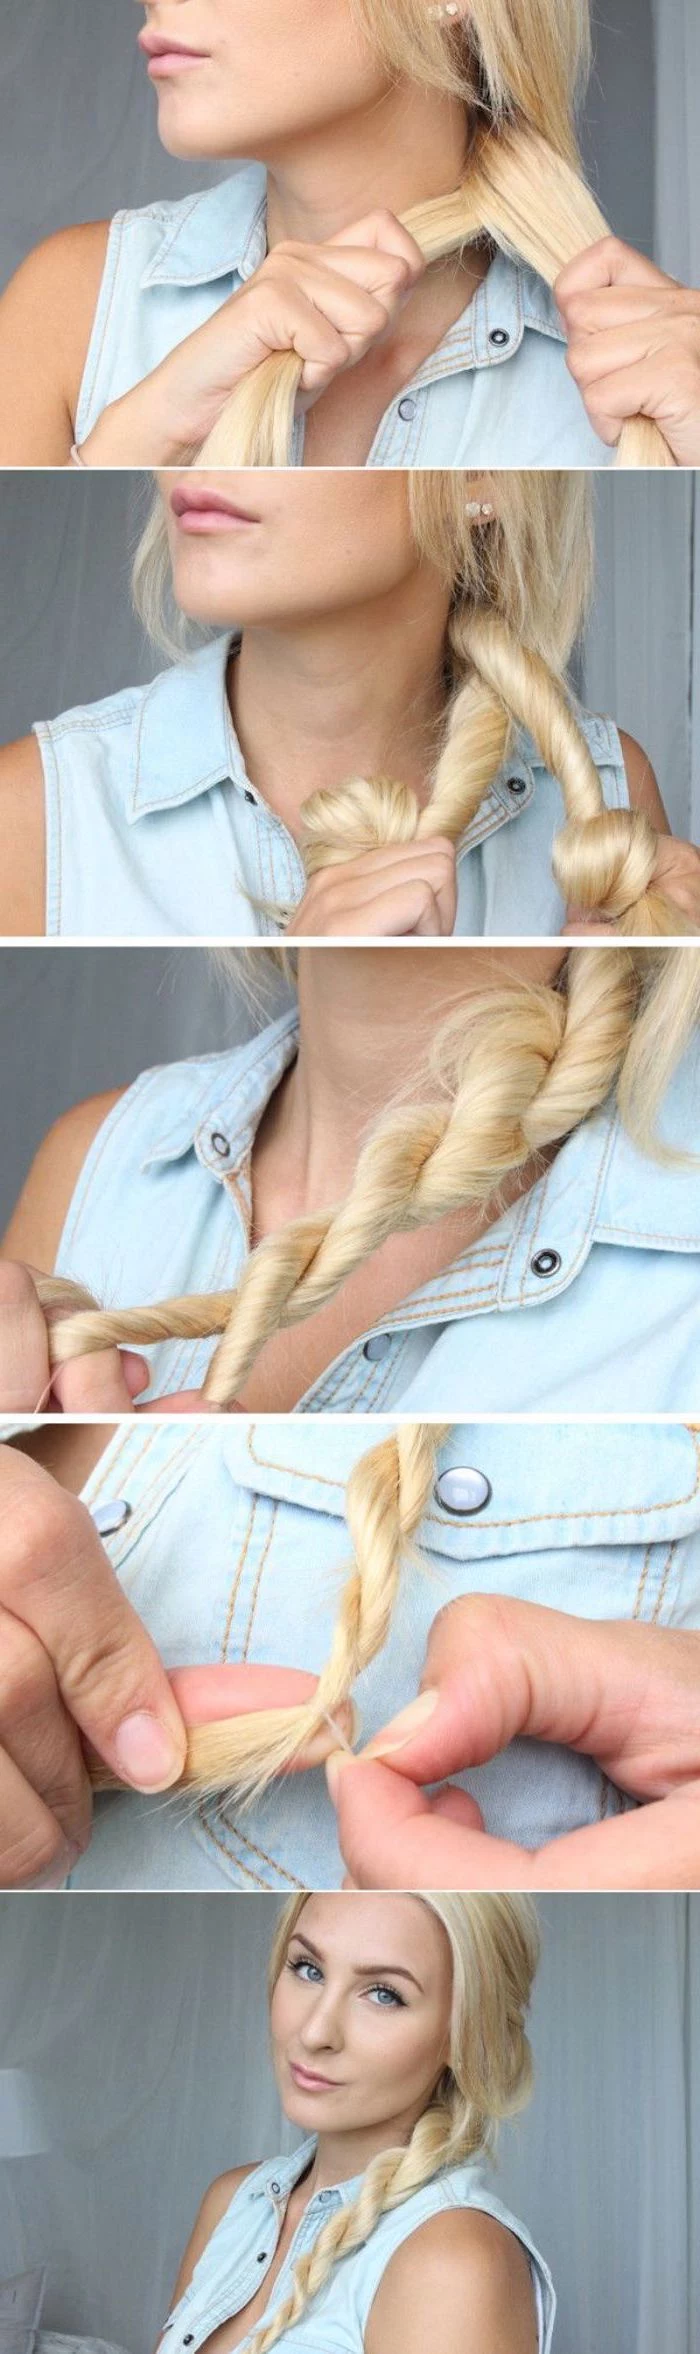 blonde woman with twisted side braid cute easy hairstyles for short hair photo collage of step by step diy tutorial